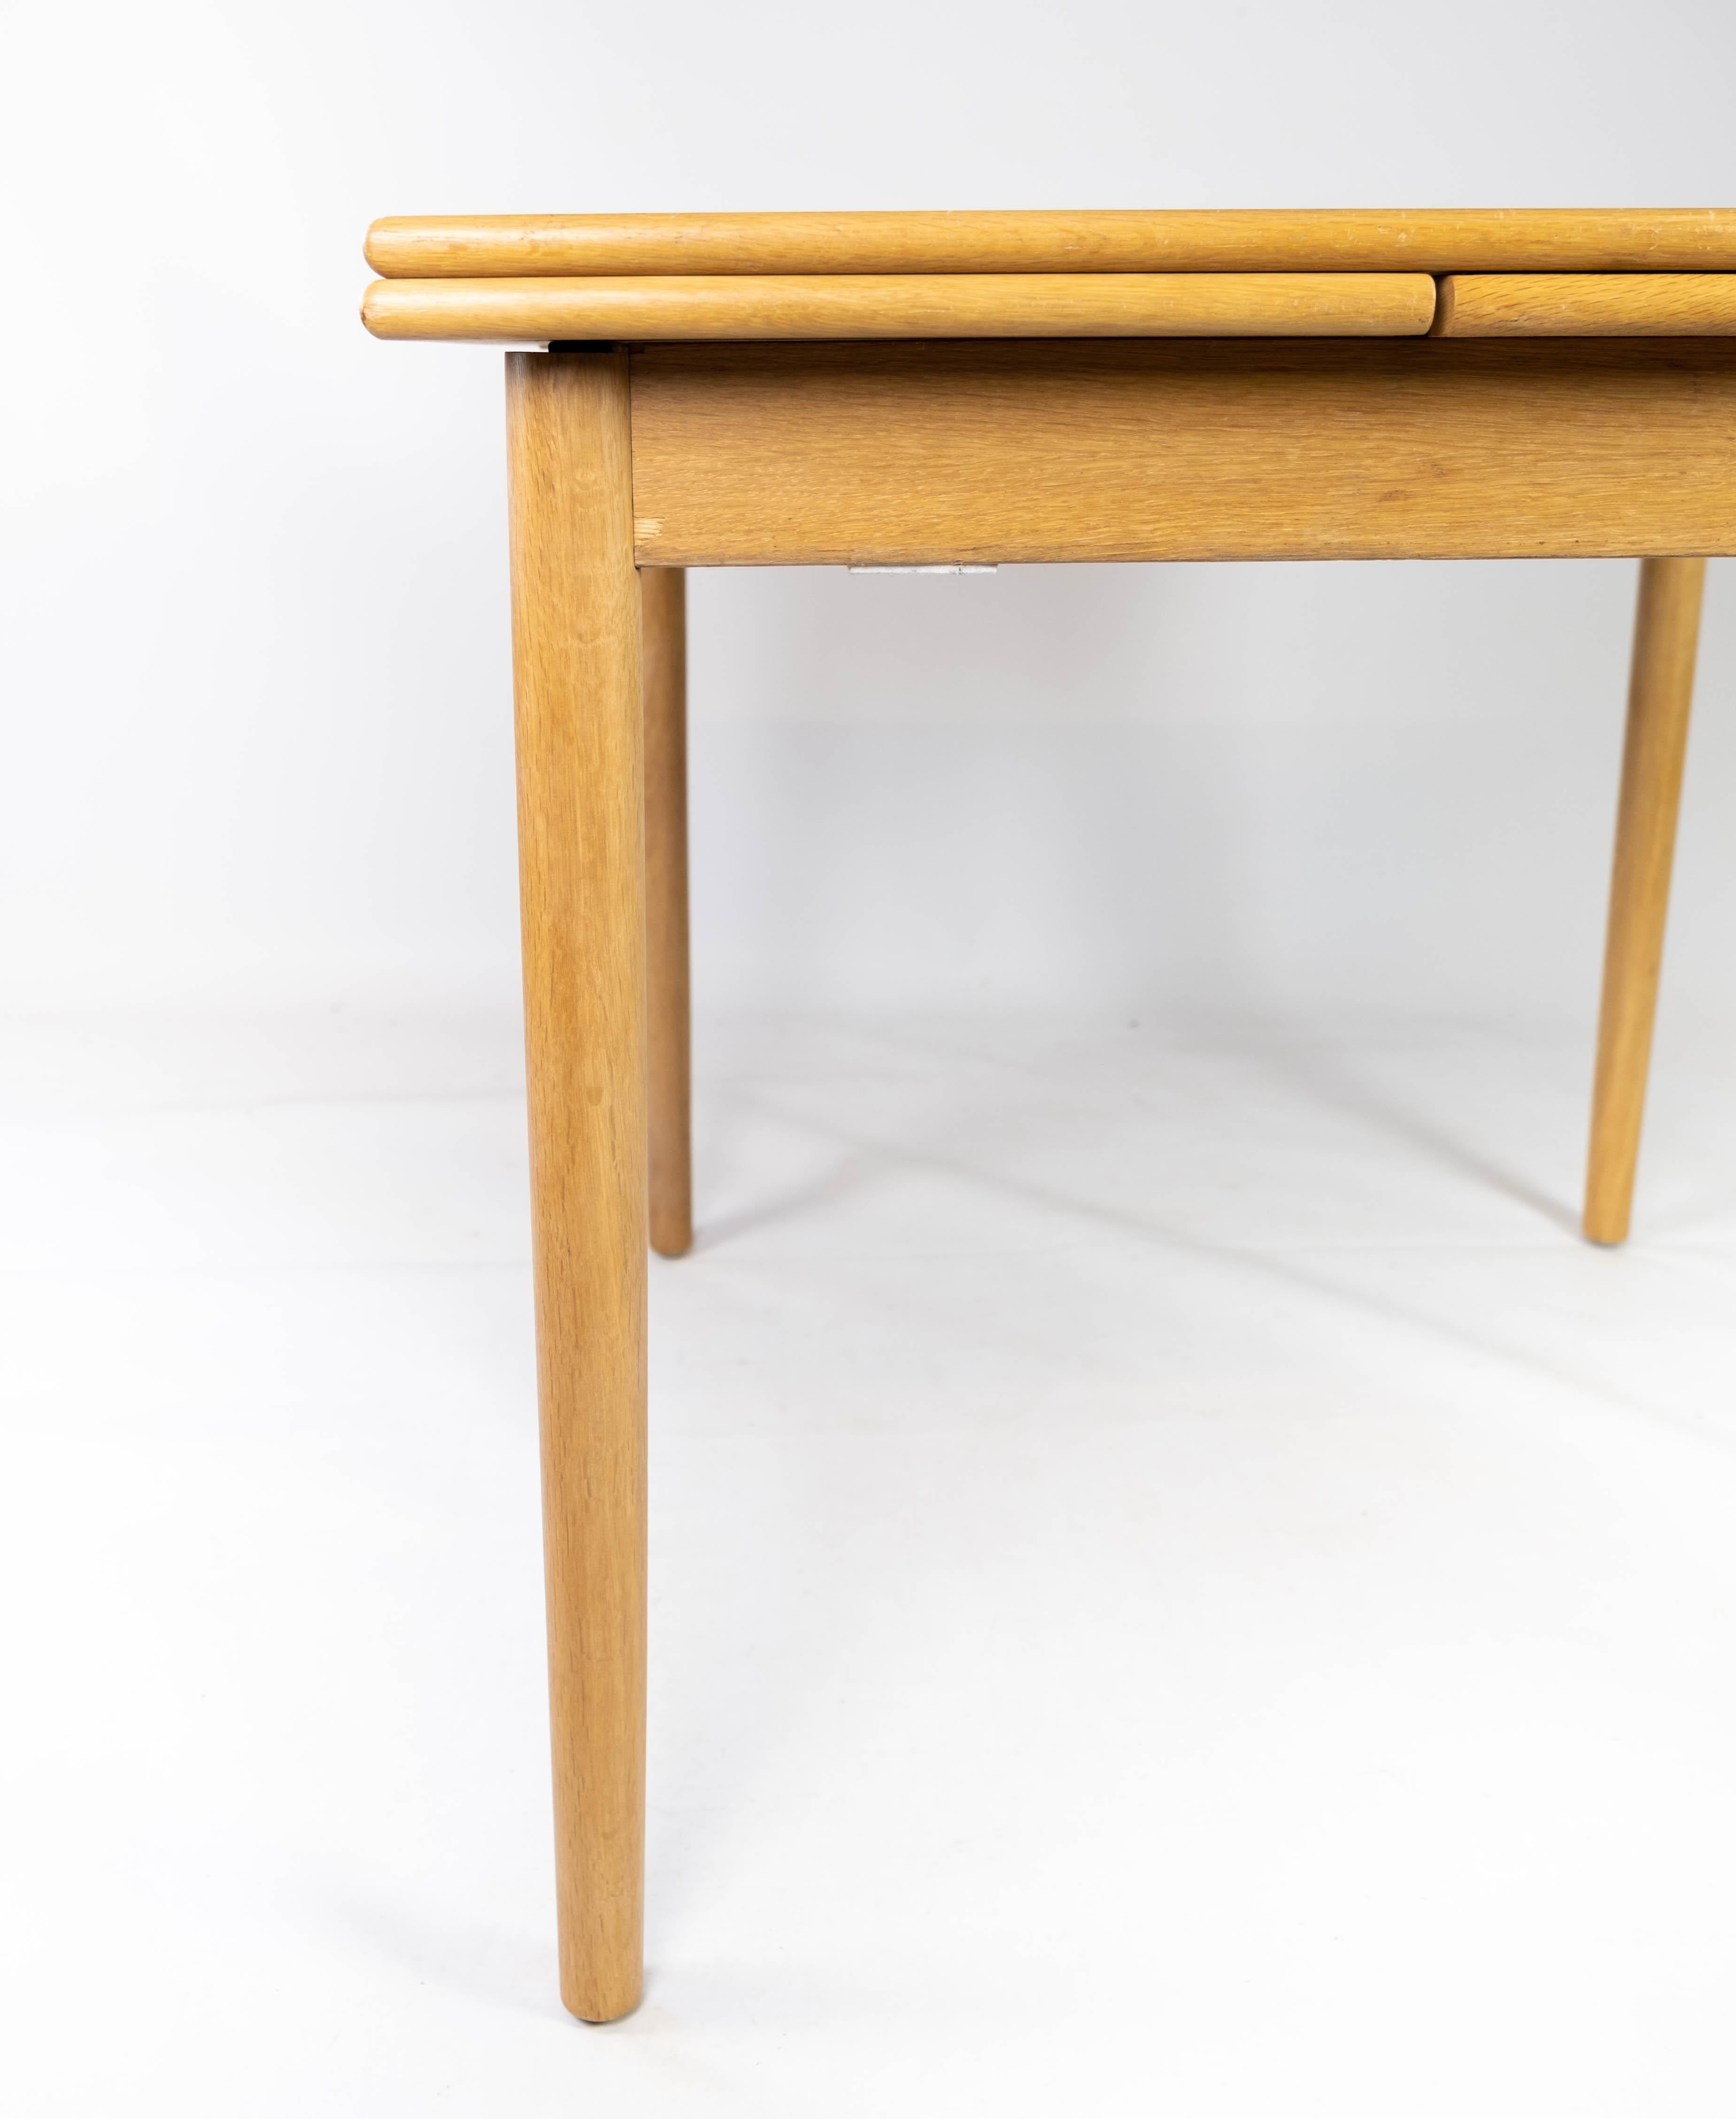 Mid-Century Modern Dining Table Made In Oak With Extensions, Danish Design From 1960s For Sale